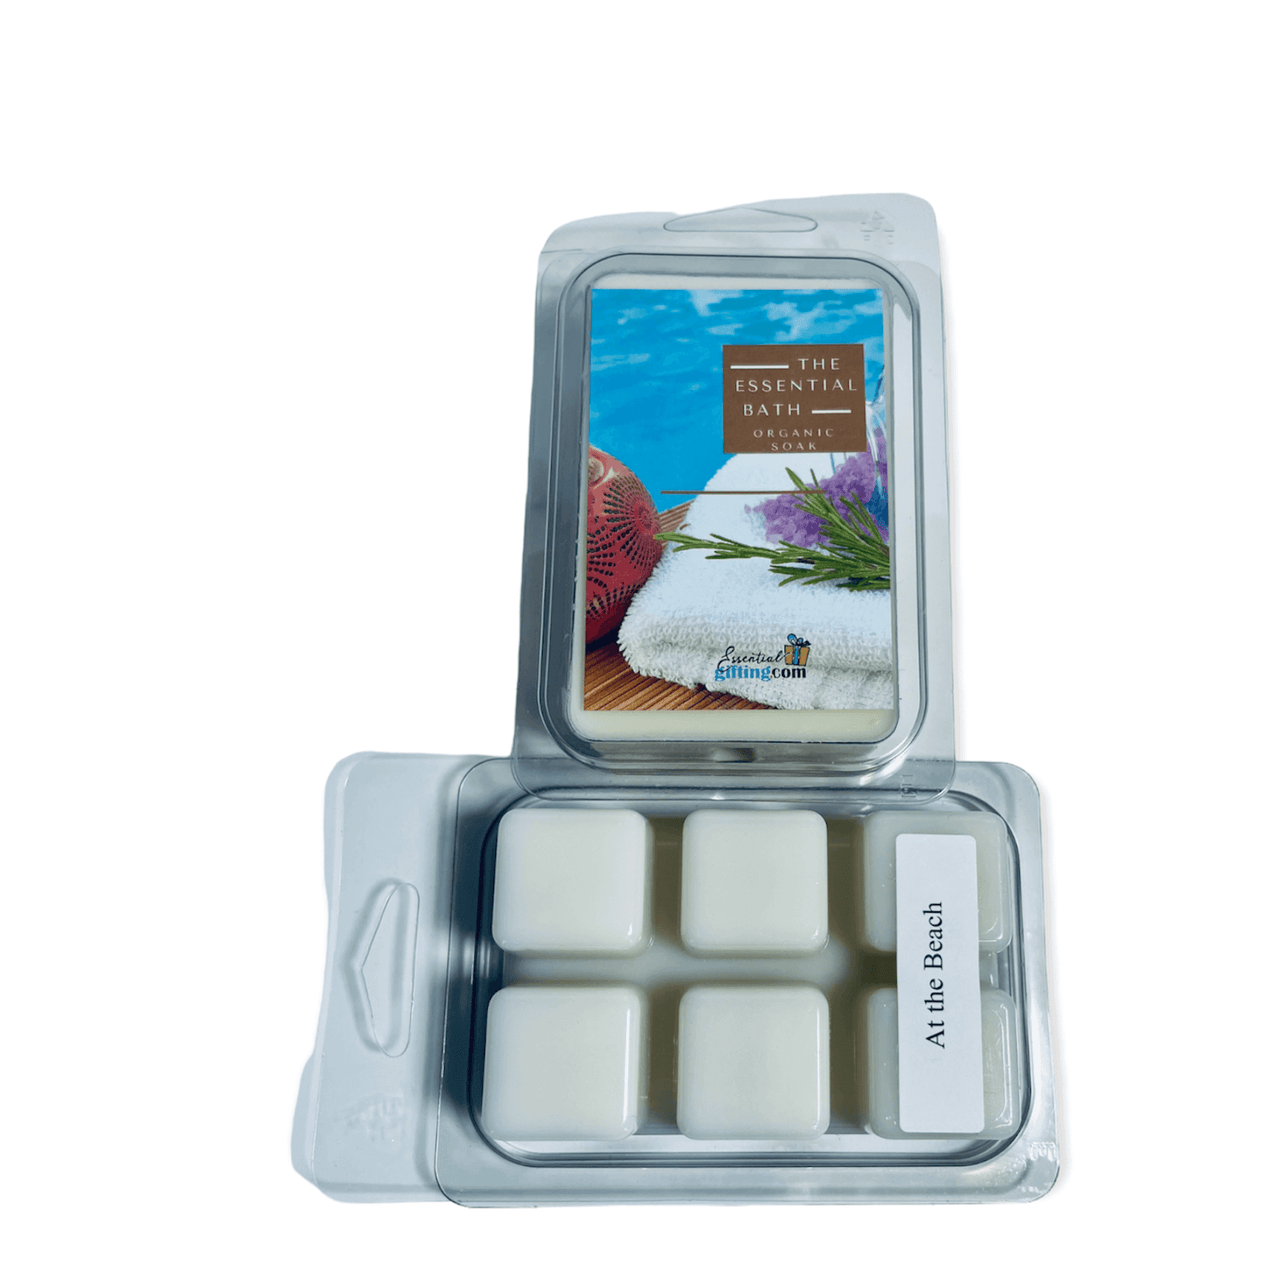 Relaxing scented wax melts in a modern display case, offering a variety of calming aromas for a soothing self-care experience.